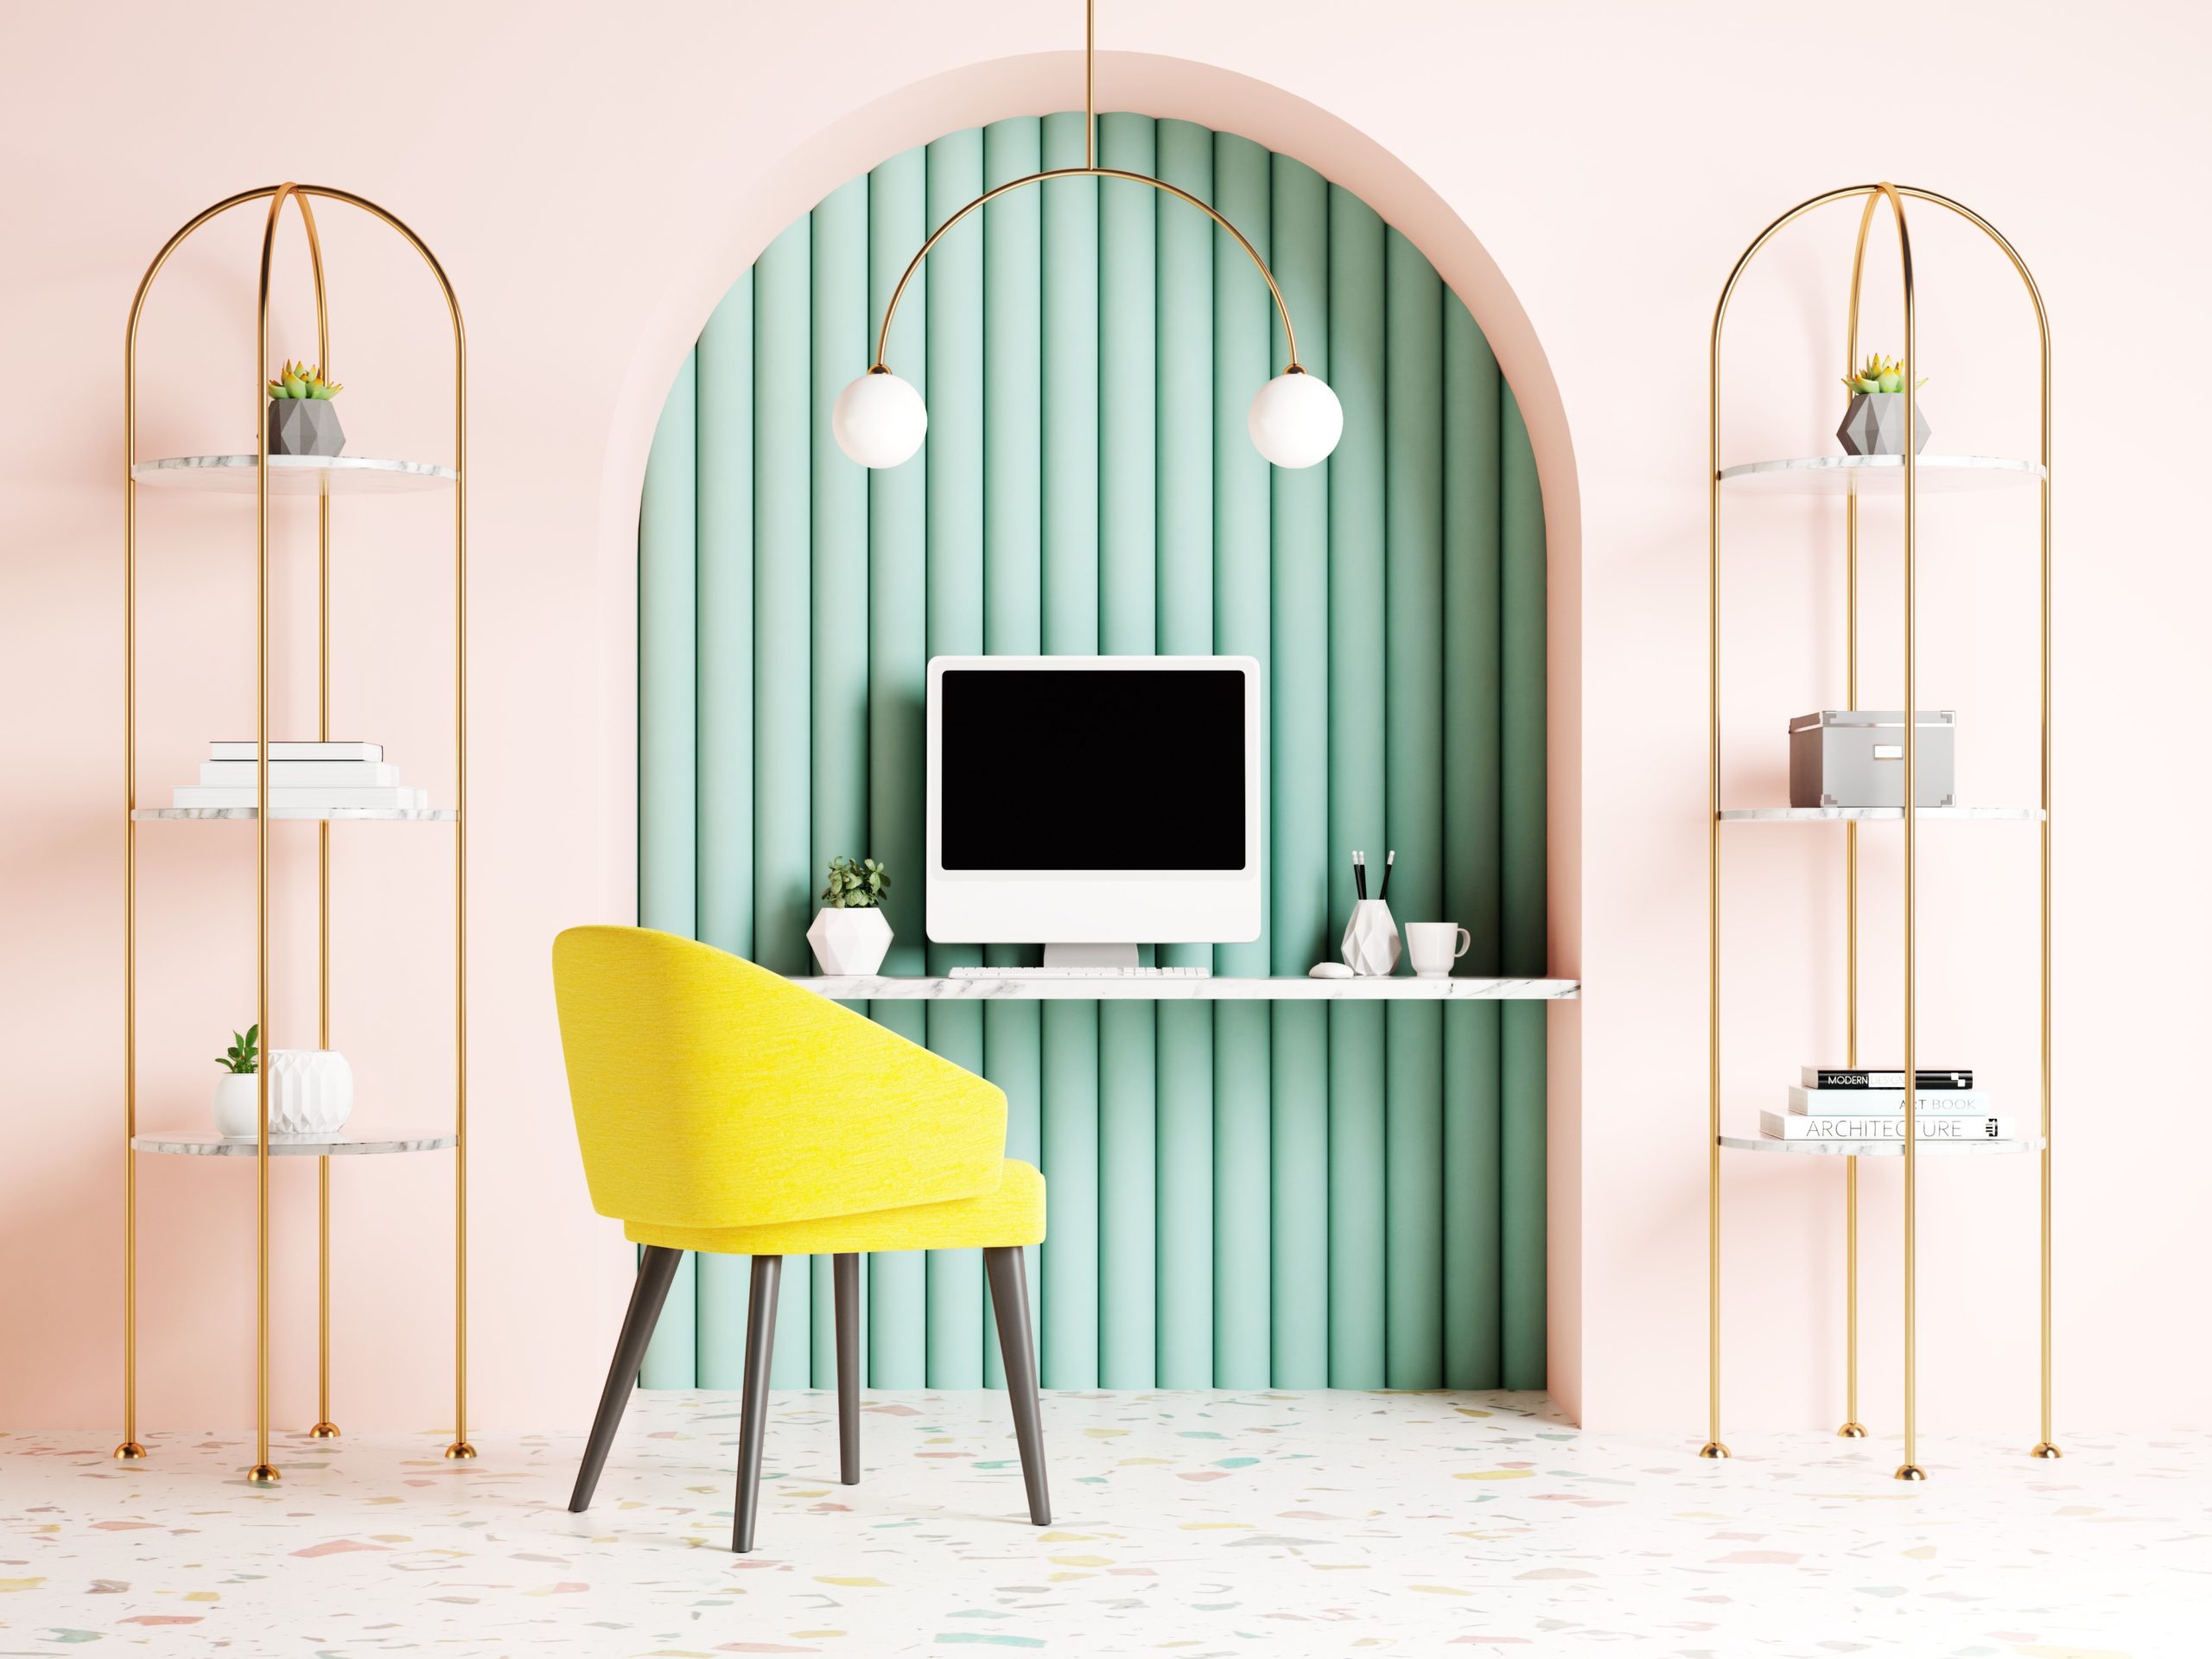 <img src="pink.jpg" alt="pink and green stylish office at home"/> 